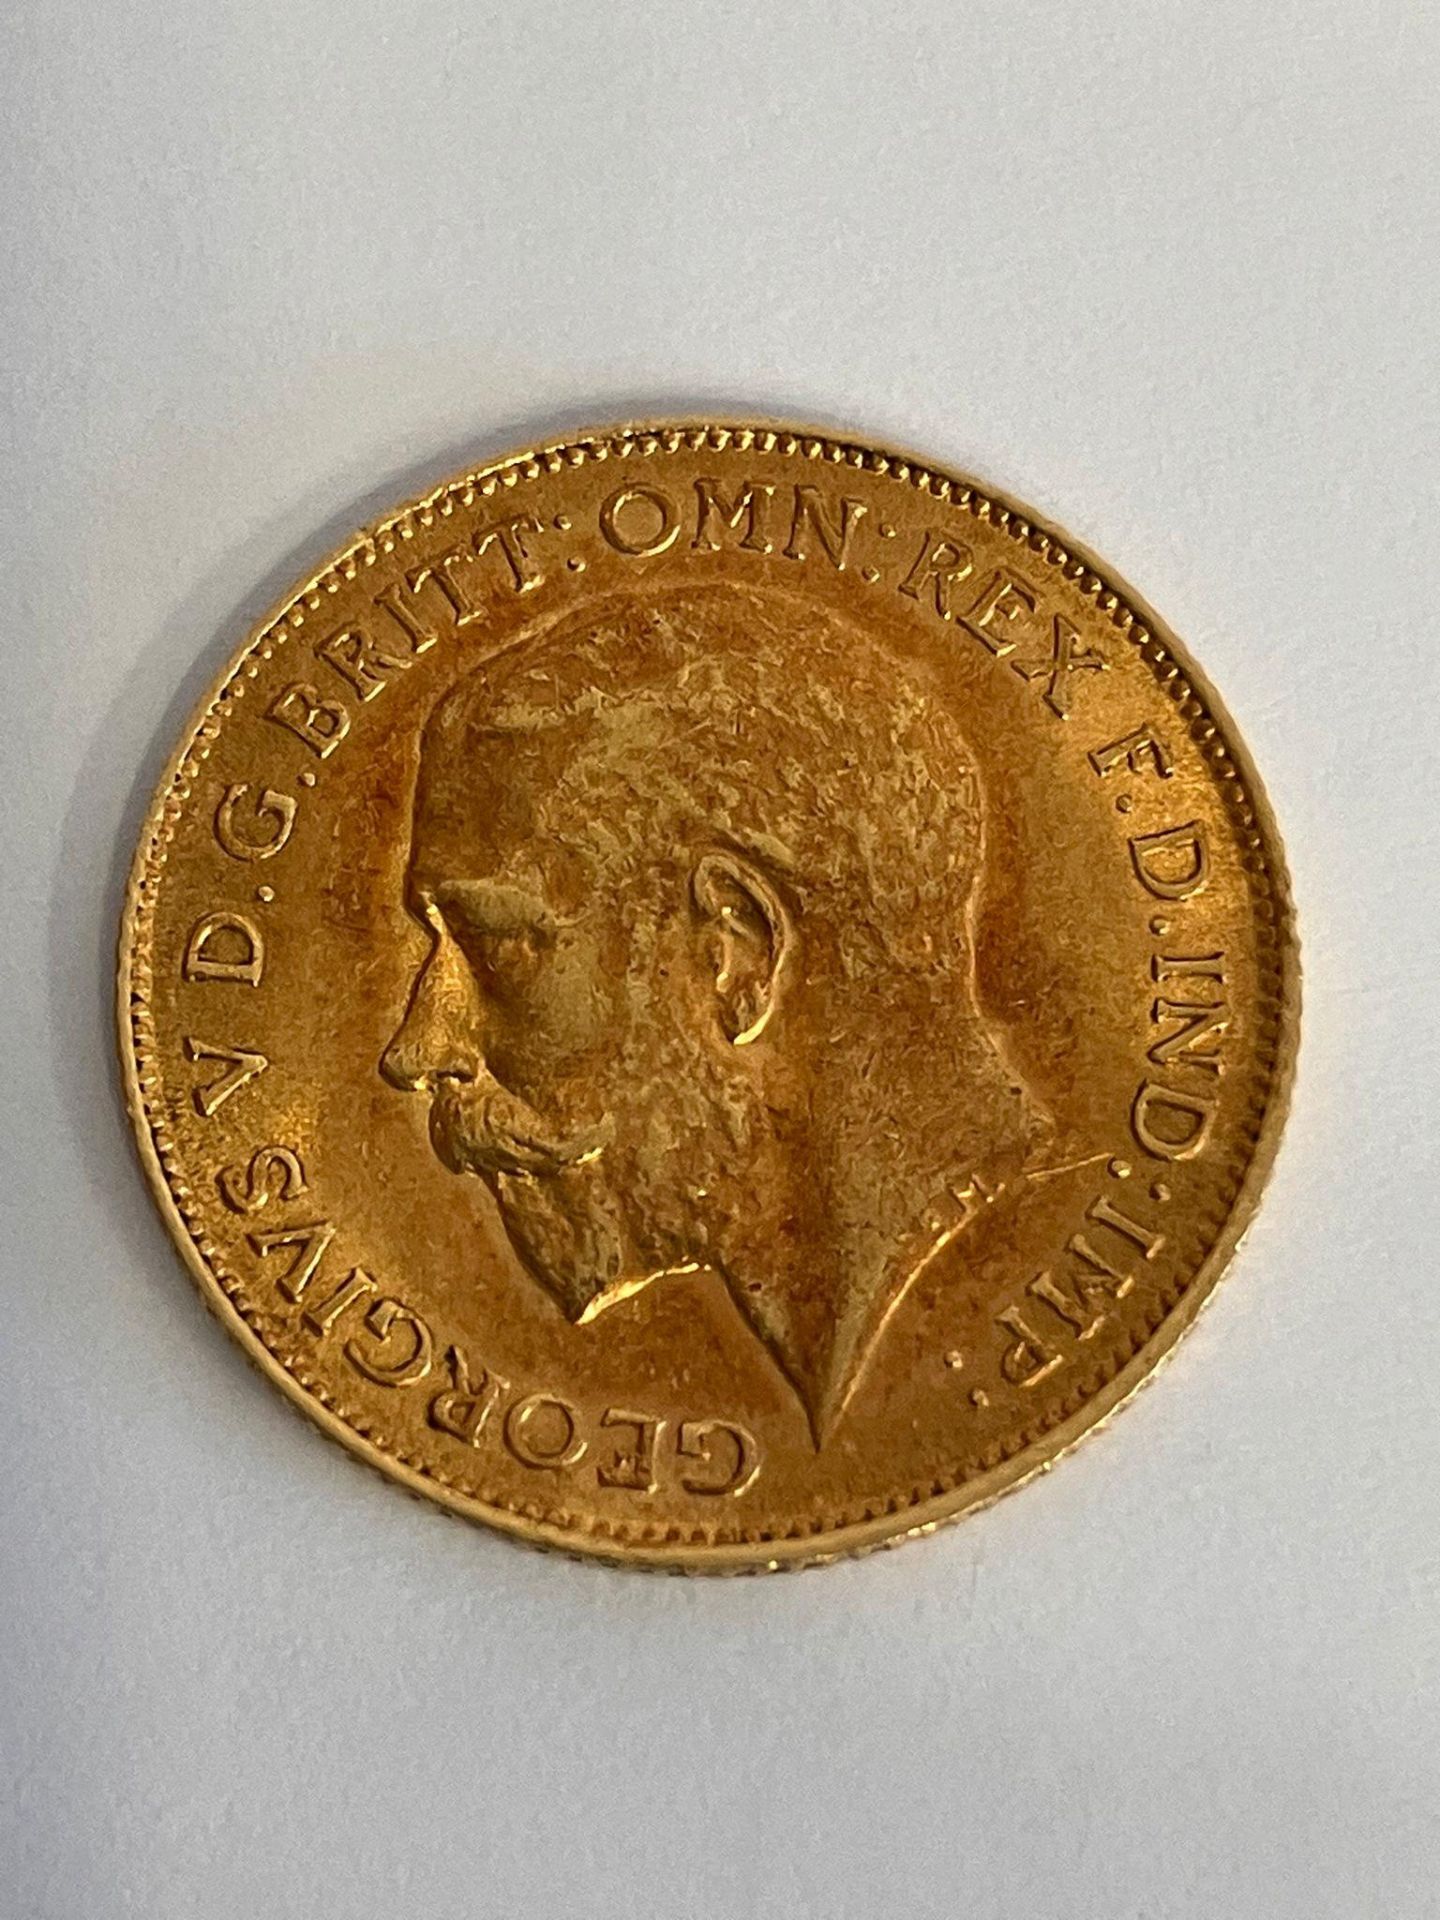 1914 HALF SOVEREIGN. 22 carat Gold. London Mint. Very fine condition. Please see pictures.